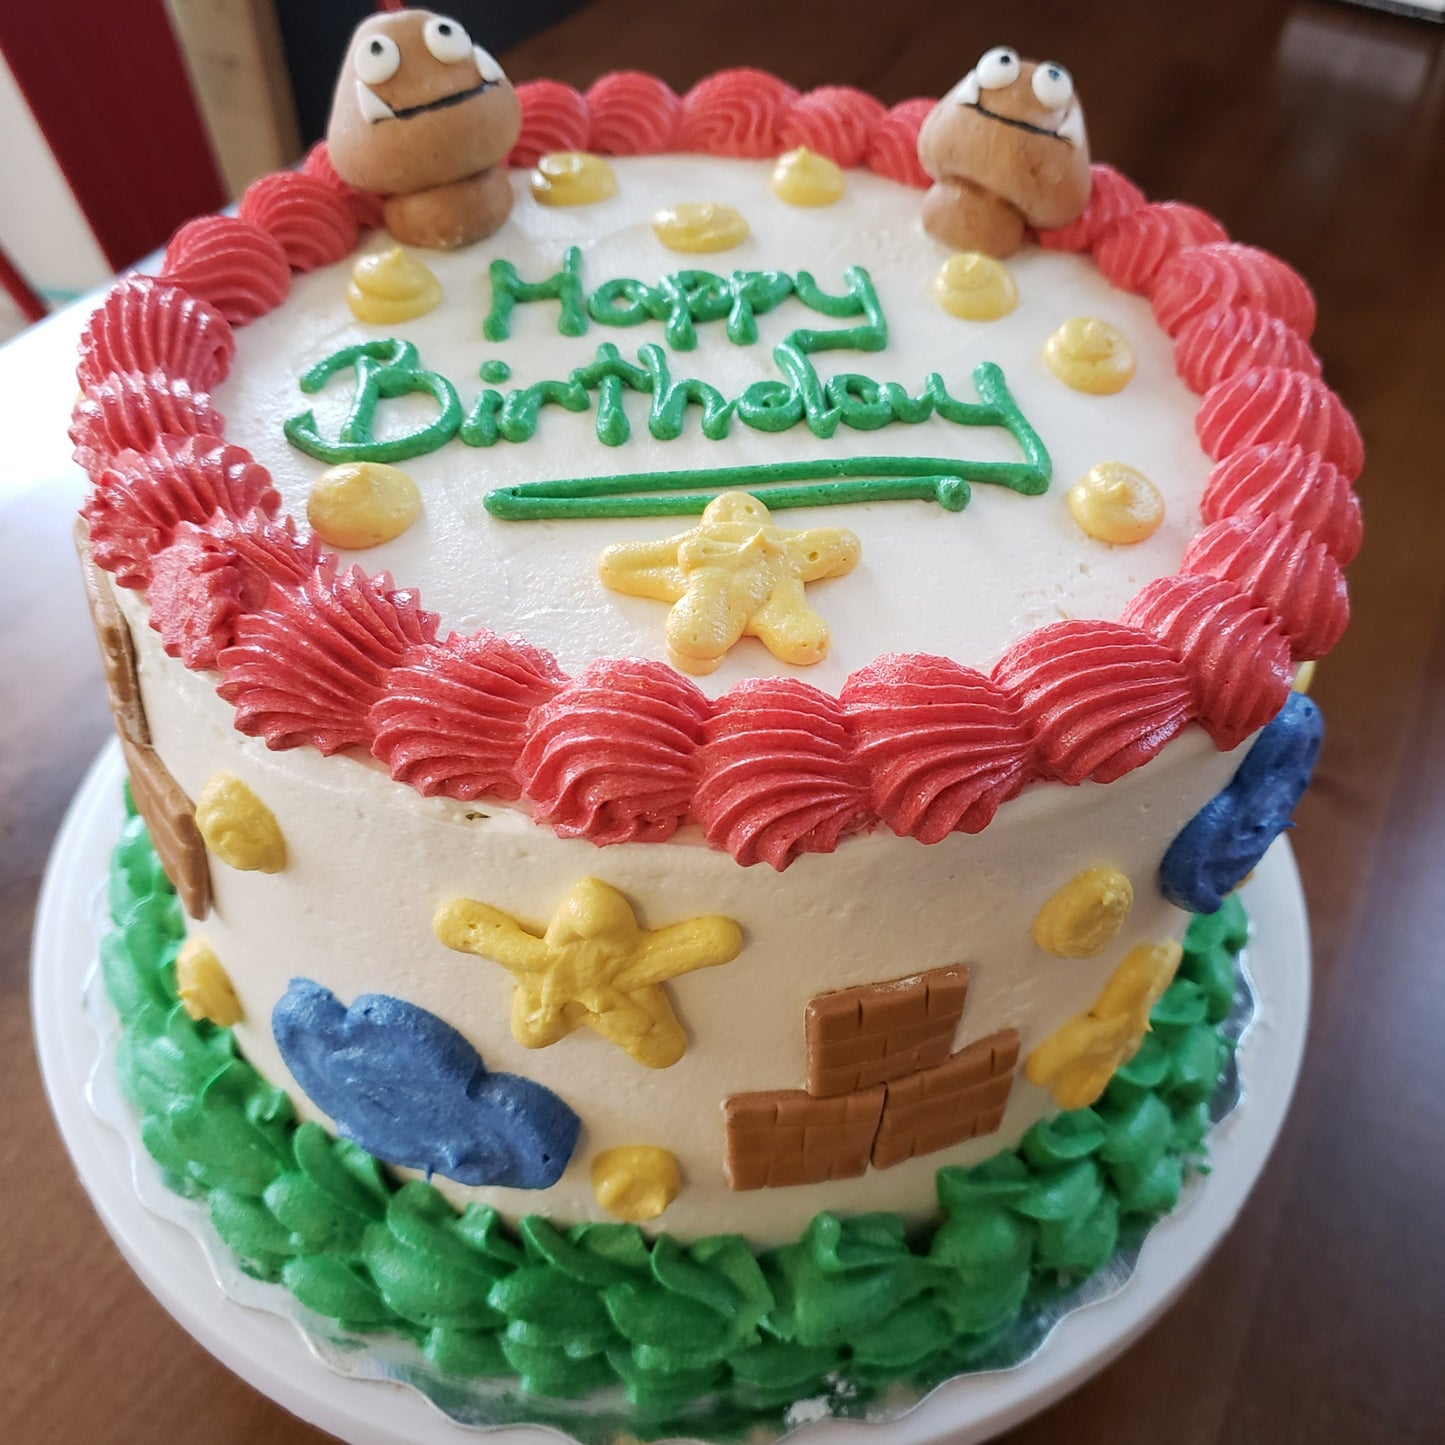 The Perfect Simple Character Cake